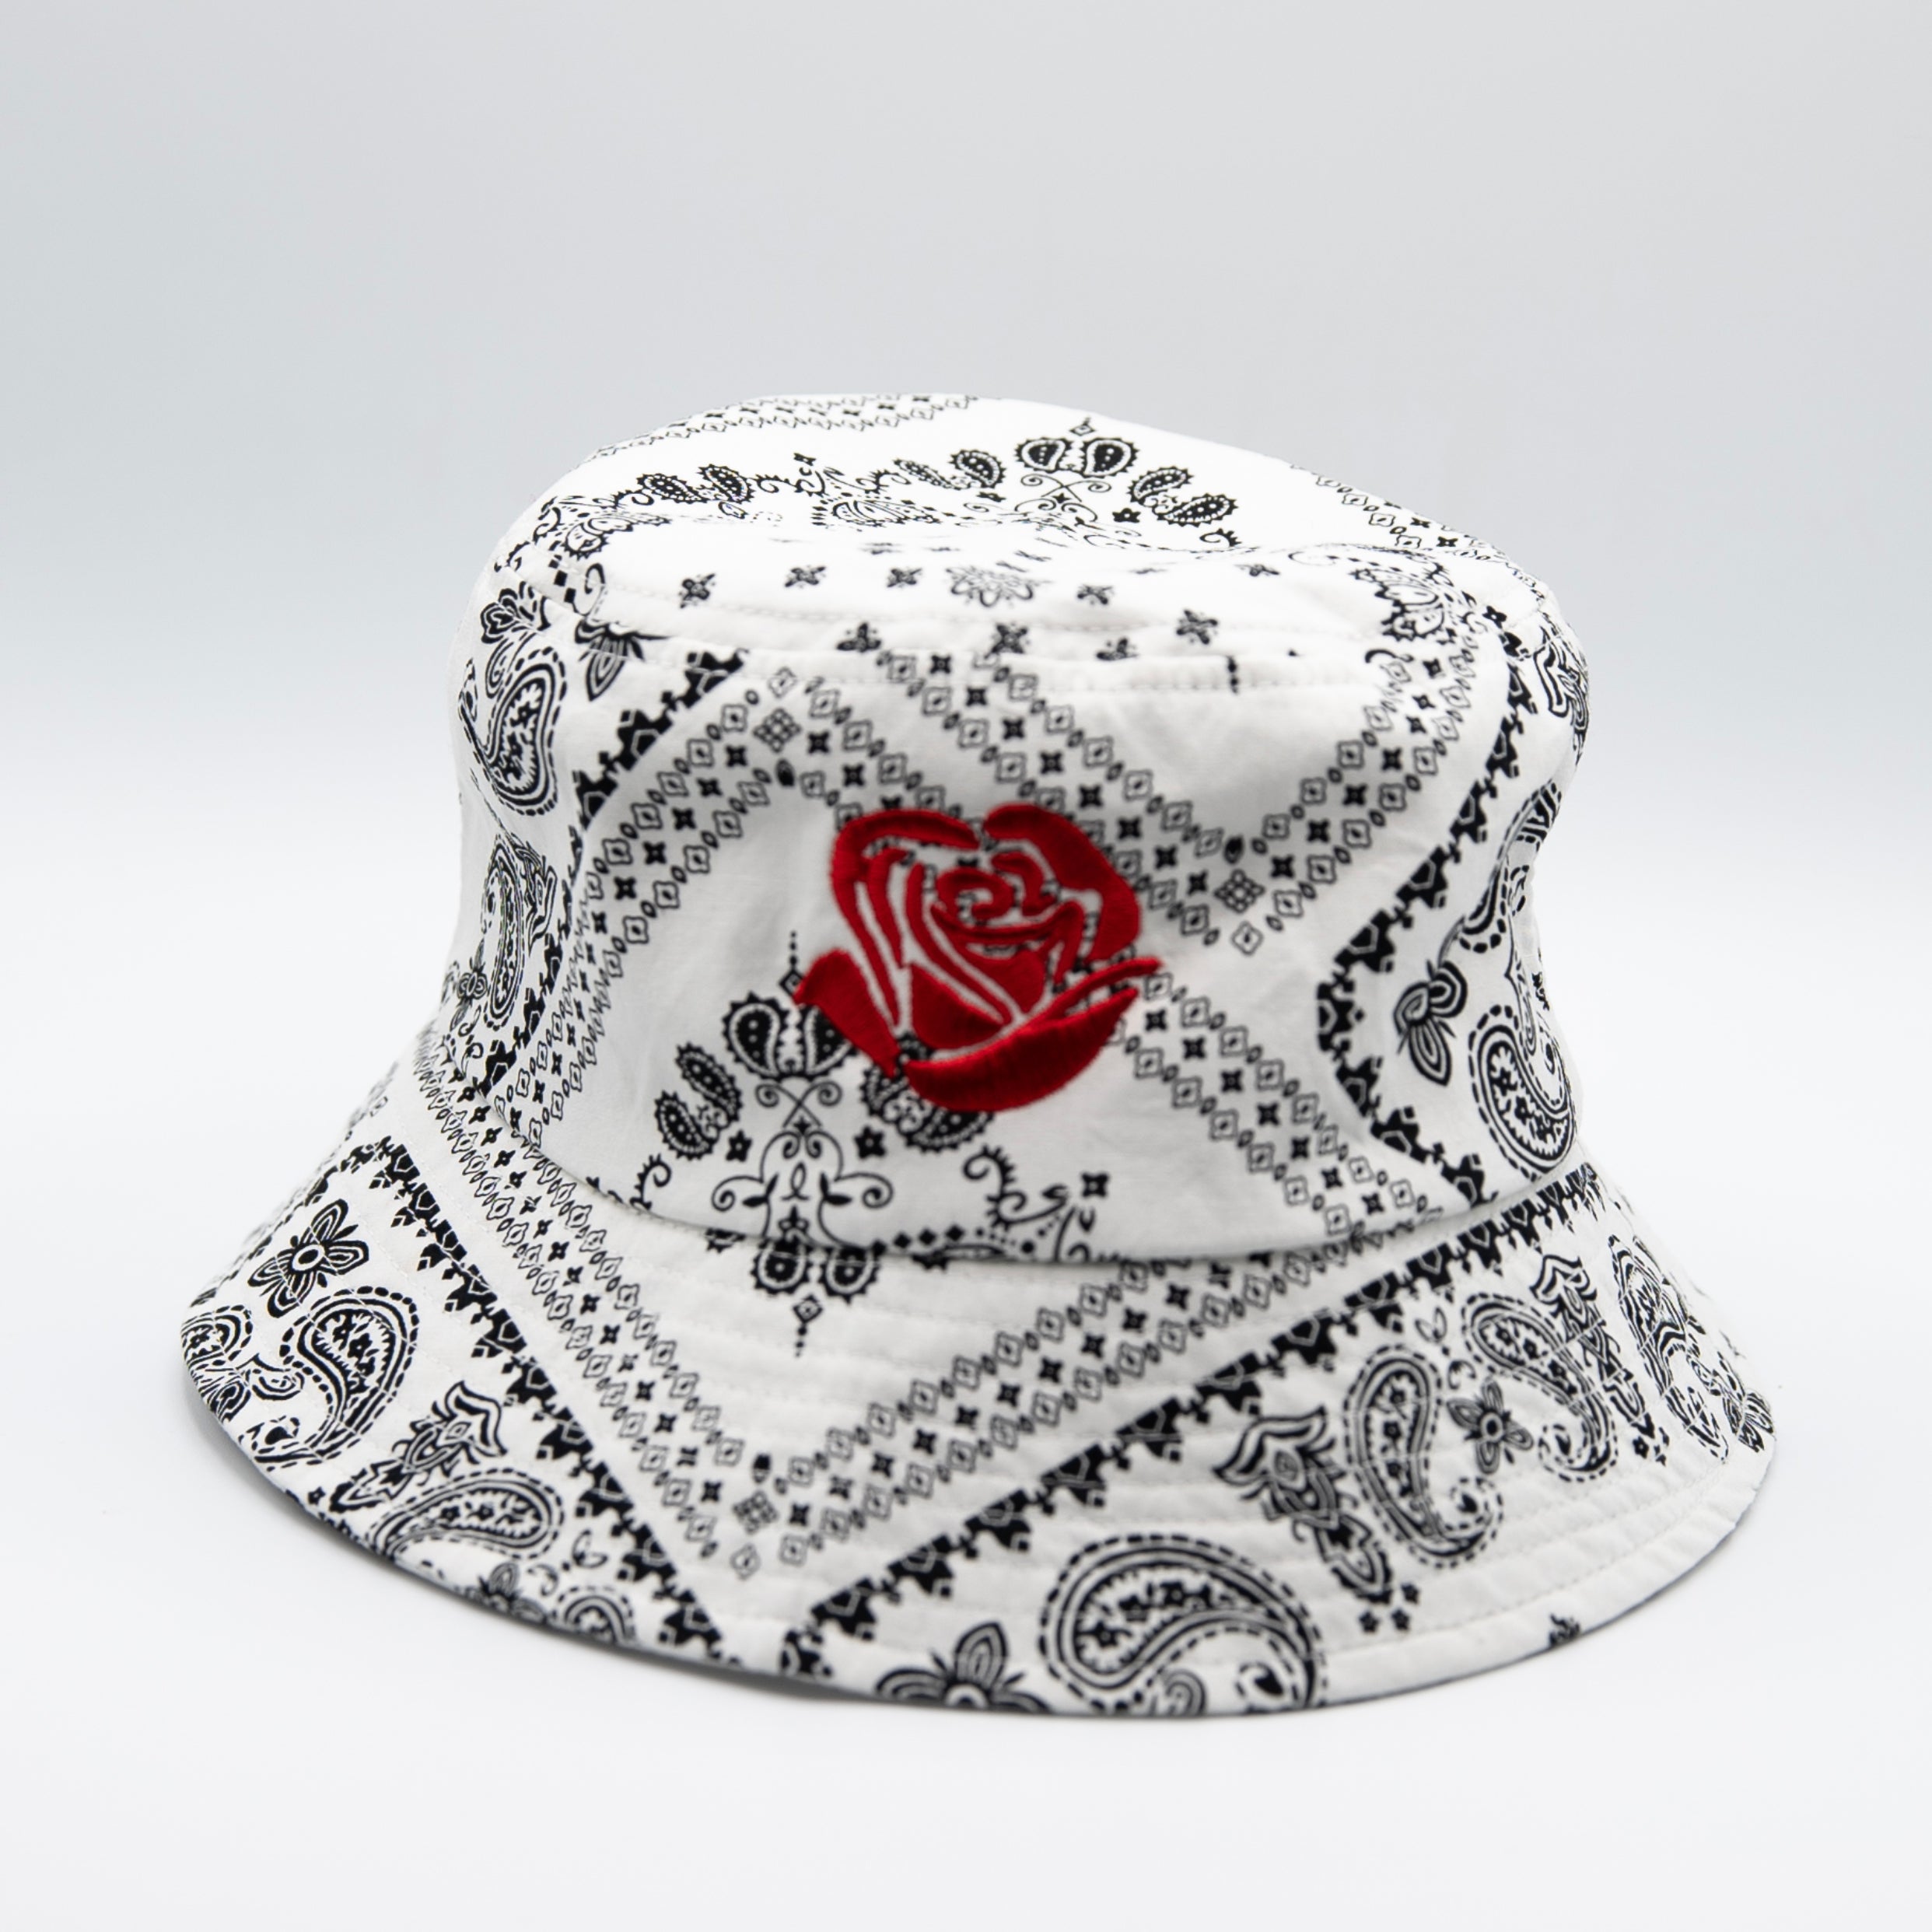 Paisley “Parlay” Bucket Hat (Limited Edition)